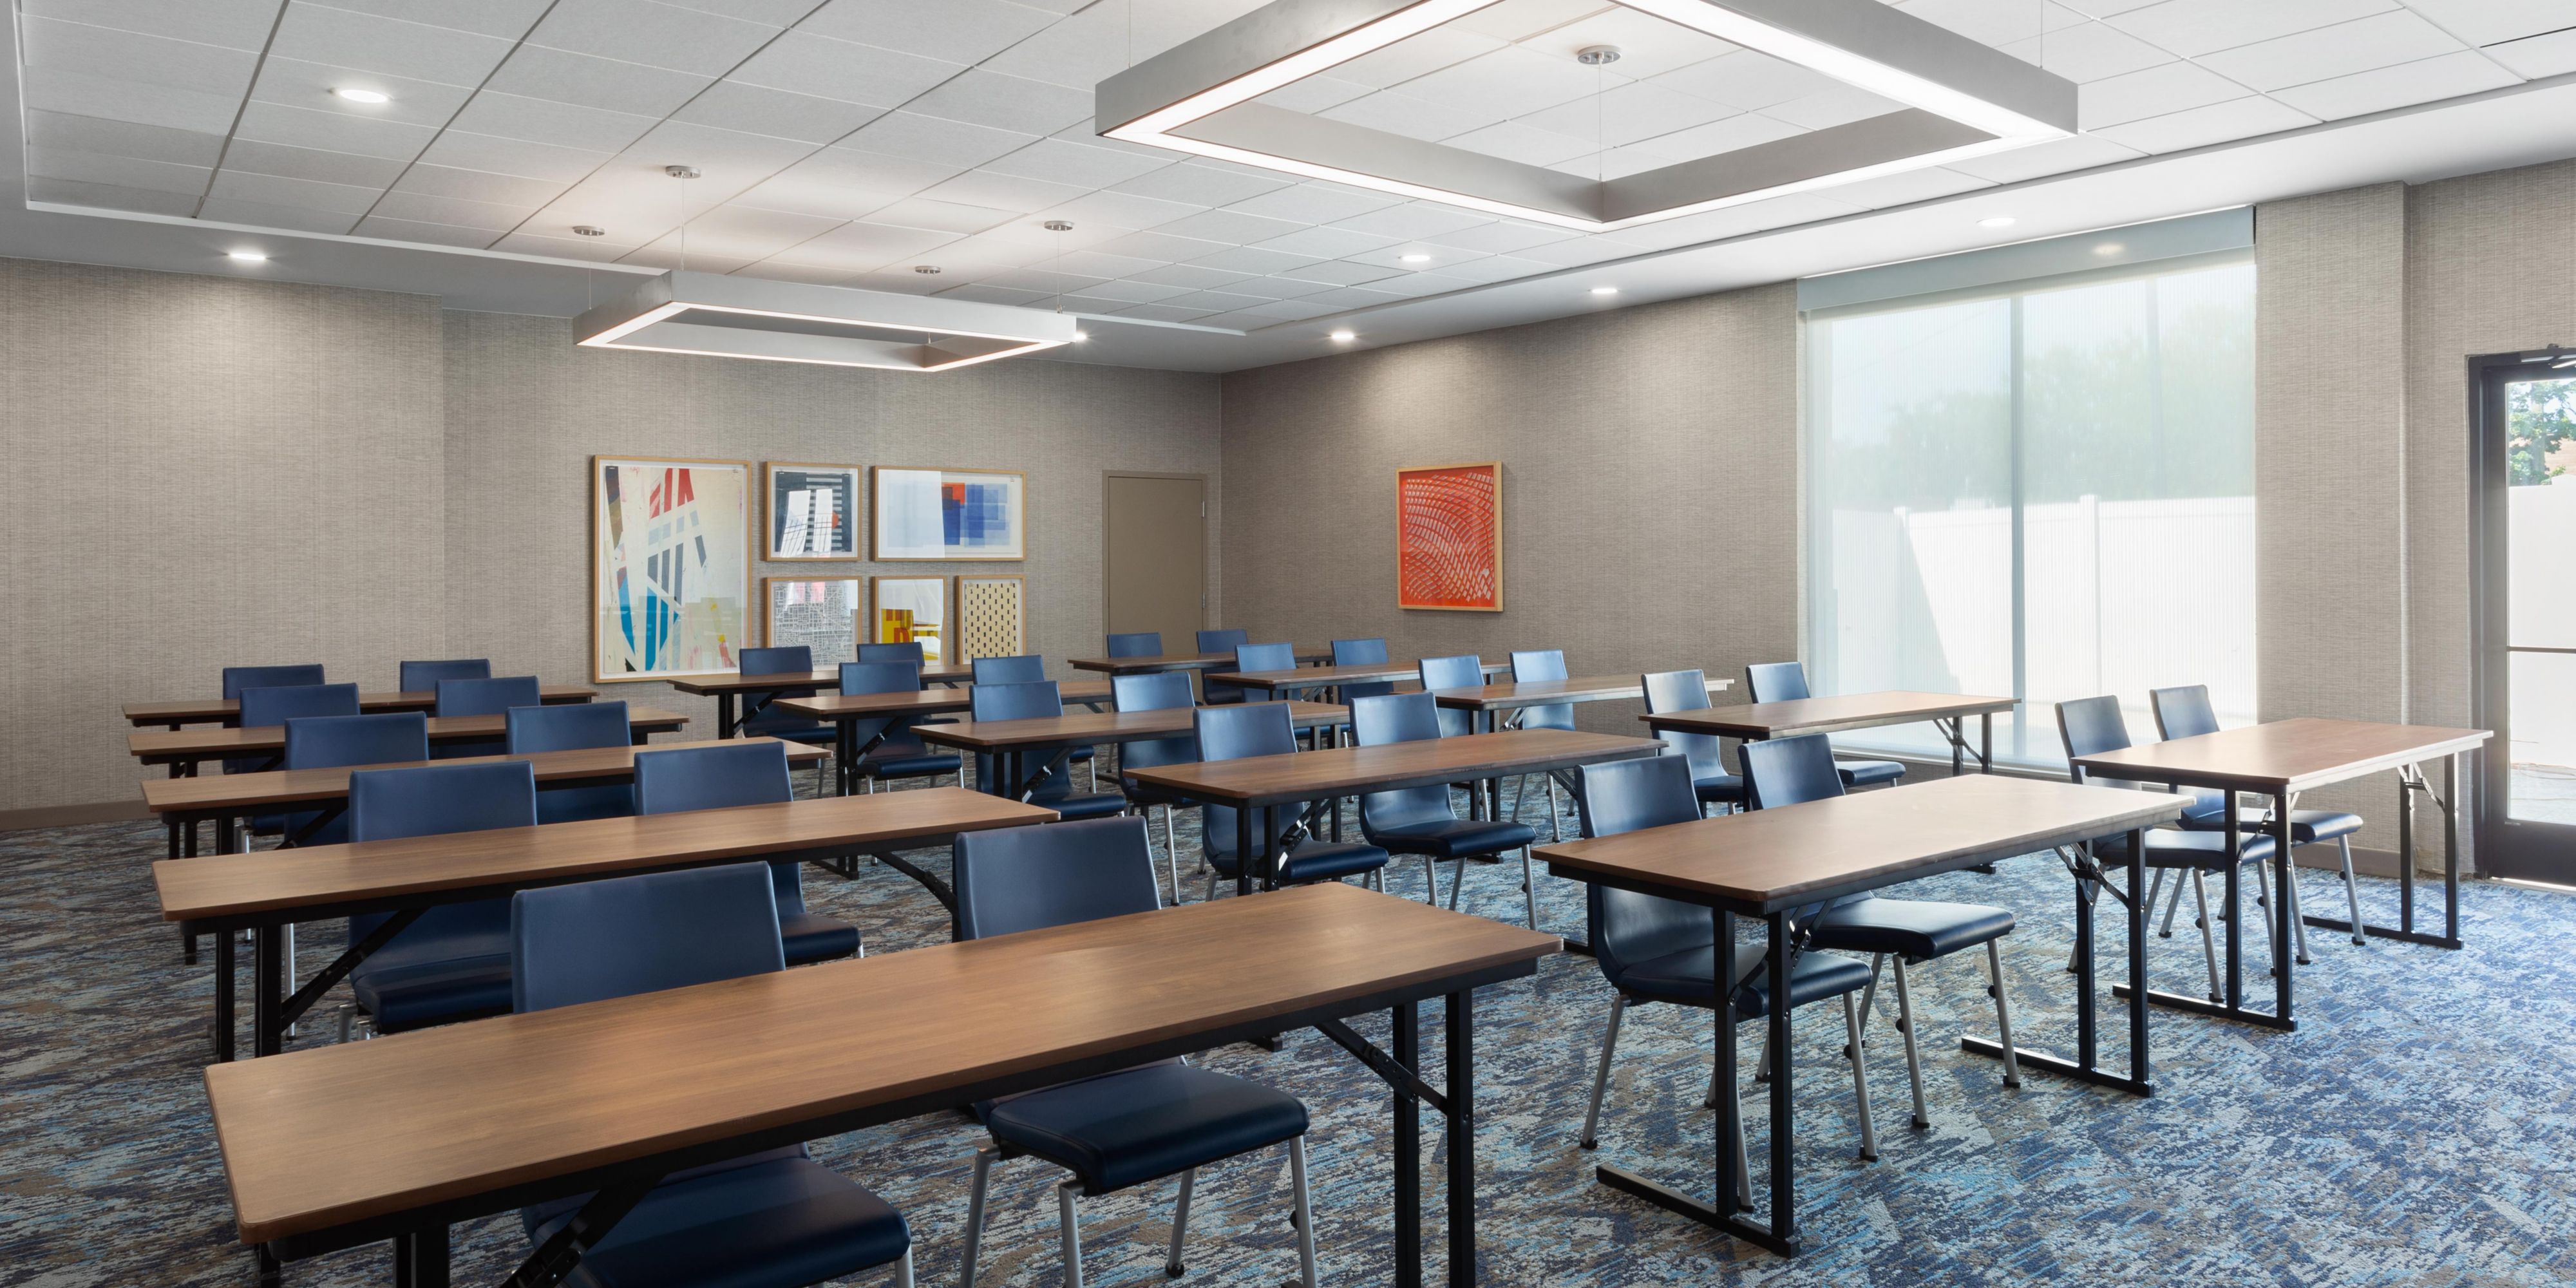 Host your meeting at our Atlanta Airport hotel, boasting 2,279 sq. ft. of flexible meeting space. Choose from seven meeting rooms, including the Board Room, Concourse A-D, and Main Cabin for up to 80 guests. On two separate floors, discover three venues for up to 15 guests each. Let our modern spaces transform your meetings into masterpieces!